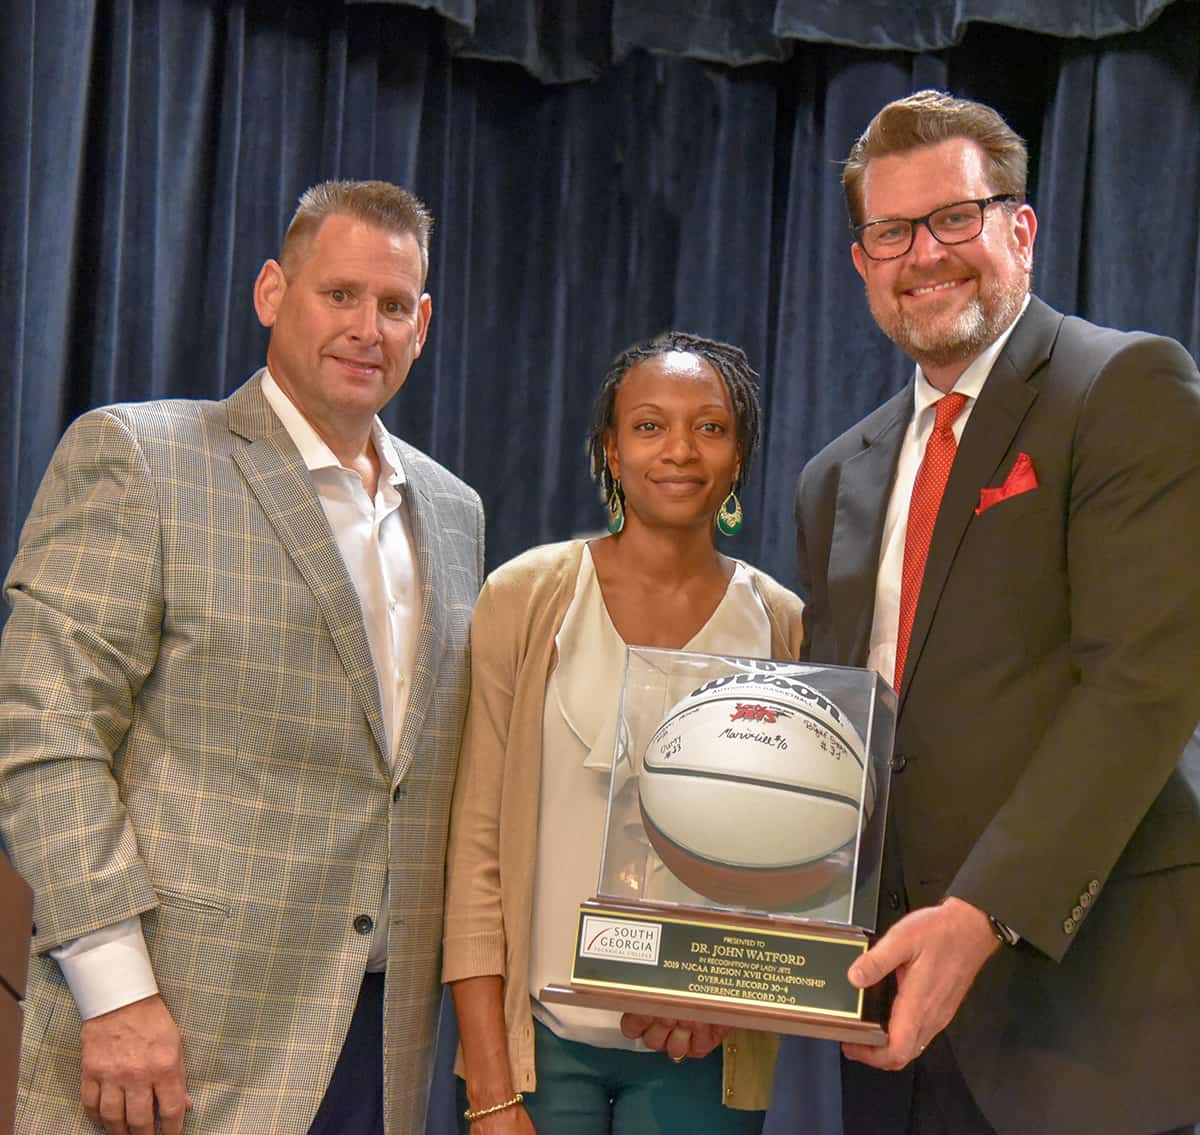 South Georgia Technical College President Dr. John Watford was presented with a framed autographed basketball by the Lady Jets for their trip to the national tournament in 2019. Shown above with Dr. Watford are Lady Jets head coach James Frey and Assistant Coach Kezia Conyers.